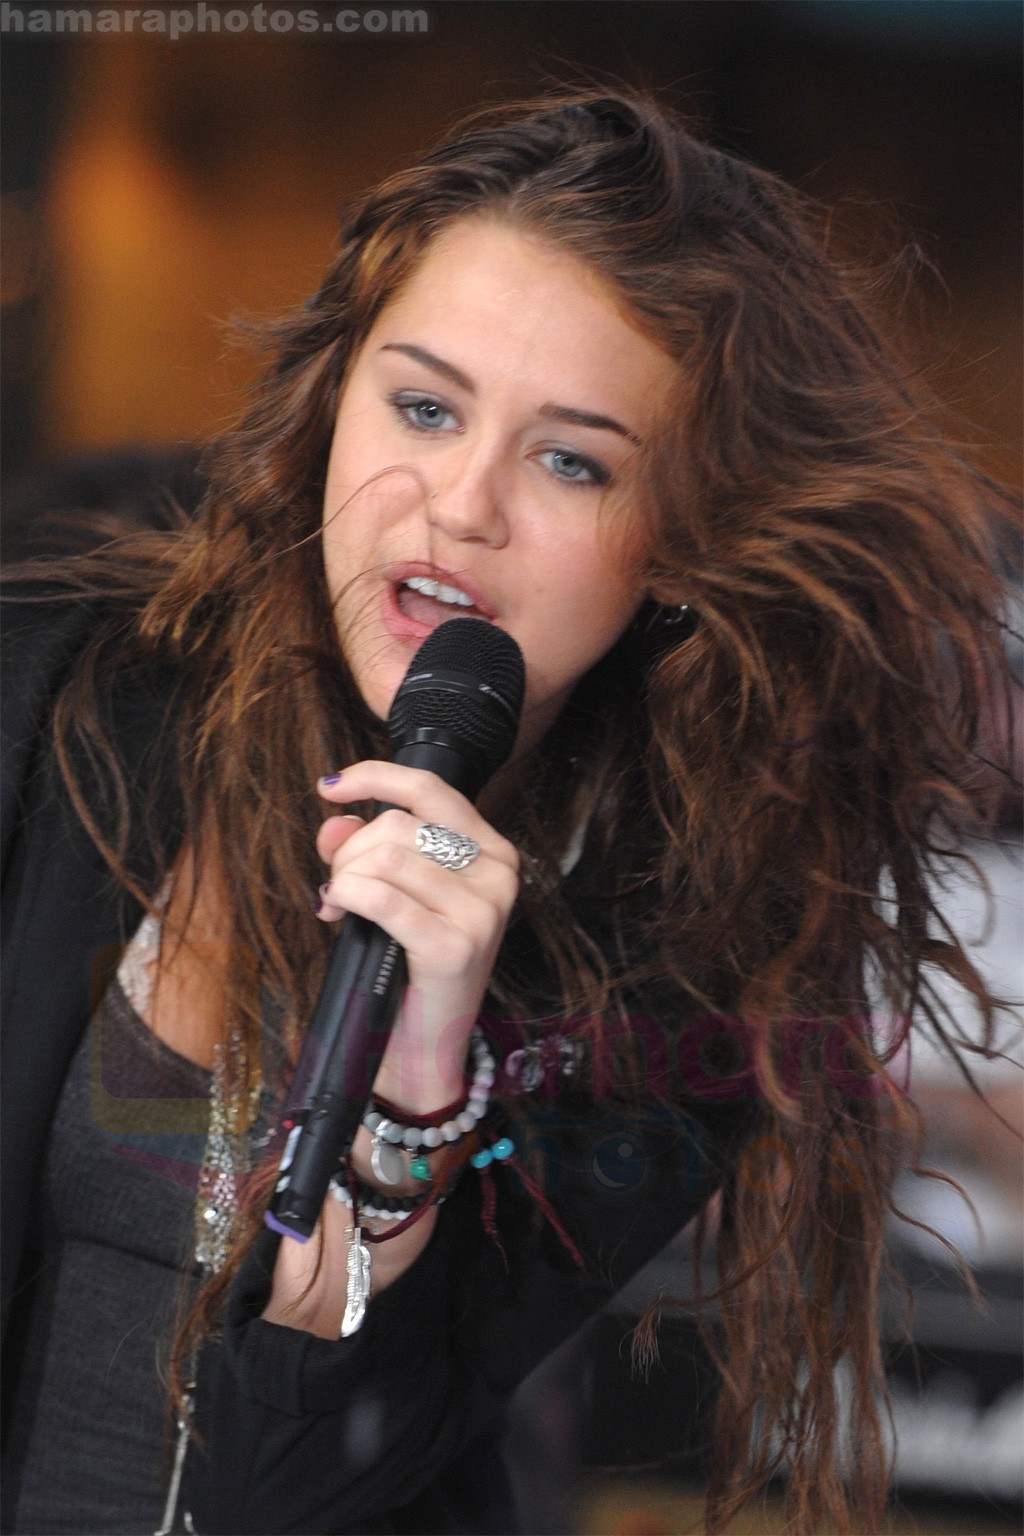 Miley Cyrus Performs On NBC's TODAY on August 28, 2009 at Rockefeller Center, NY 